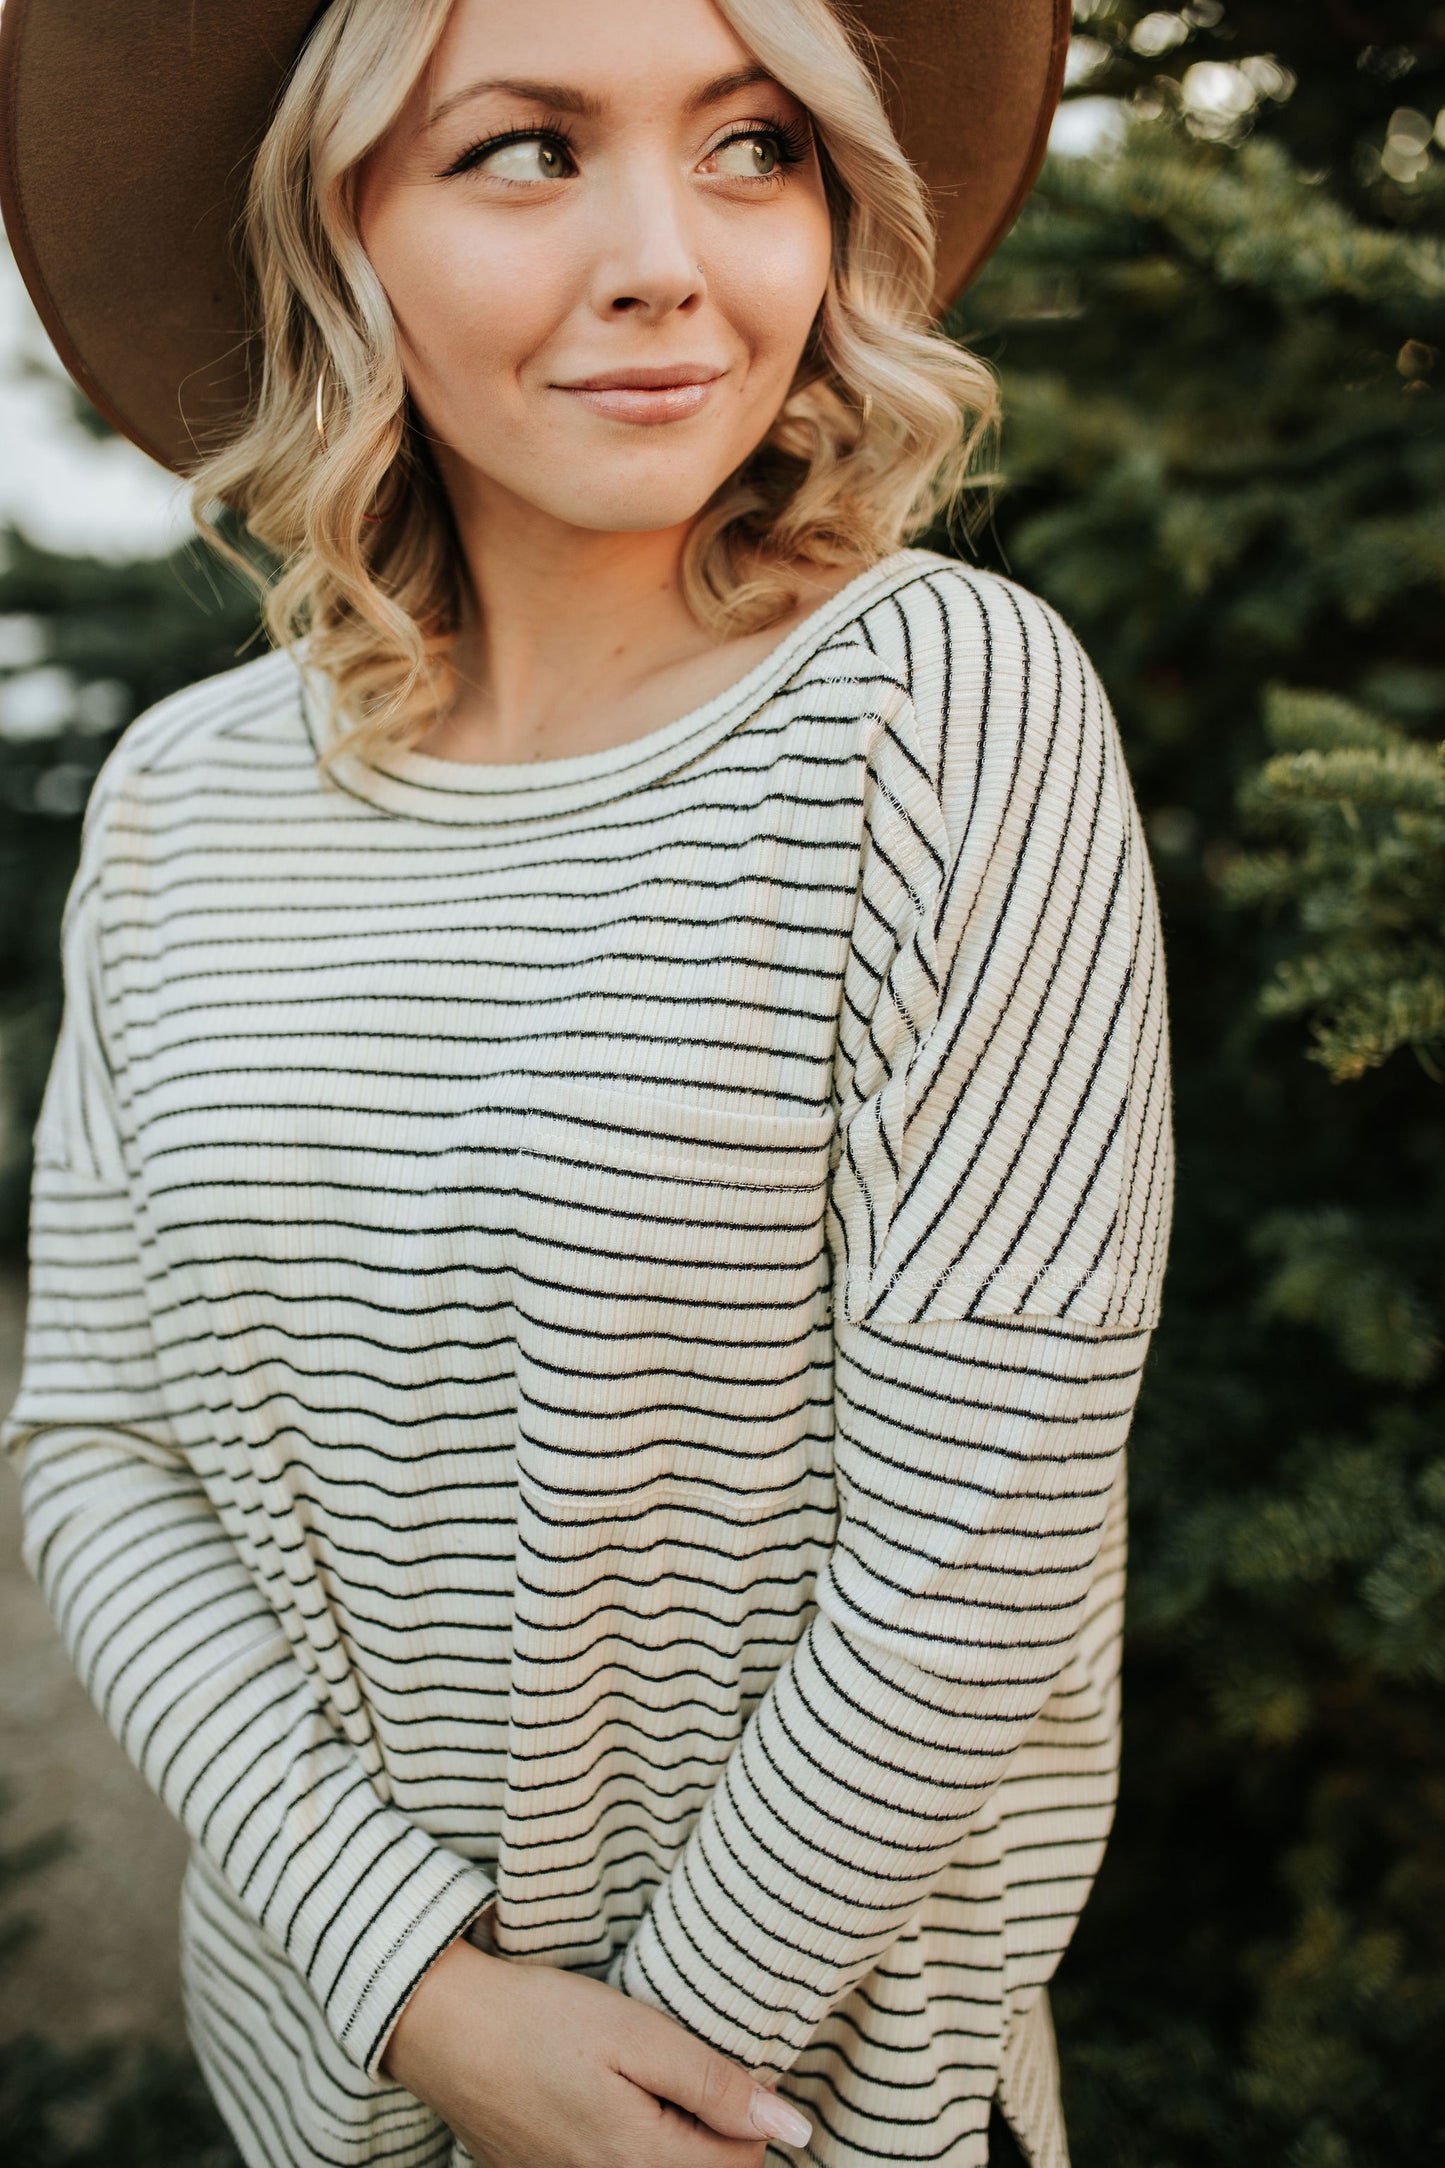 THE SYDNEY STRIPED LONG SLEEVE TOP IN CREAM